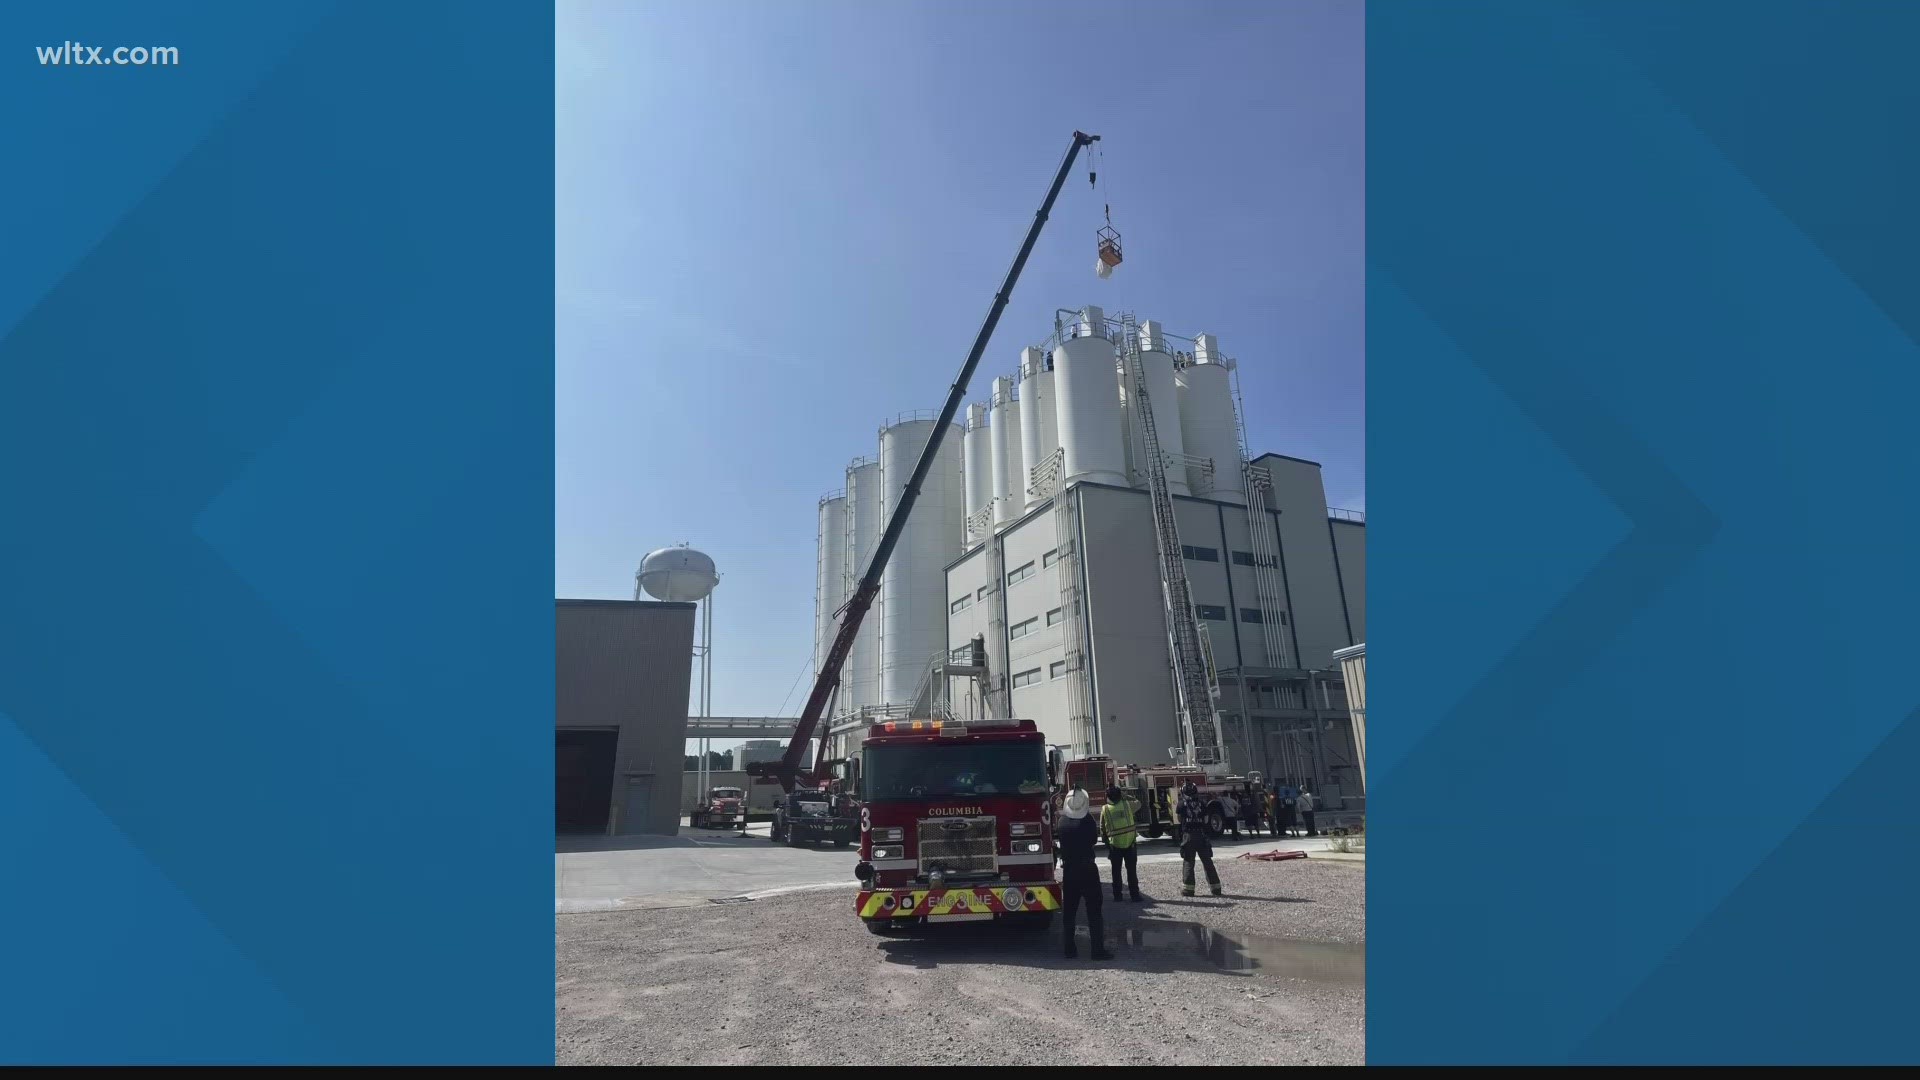 The Columbia Fire Department rescued a worker at an industrial facility who was stuck 130 feet in the air.